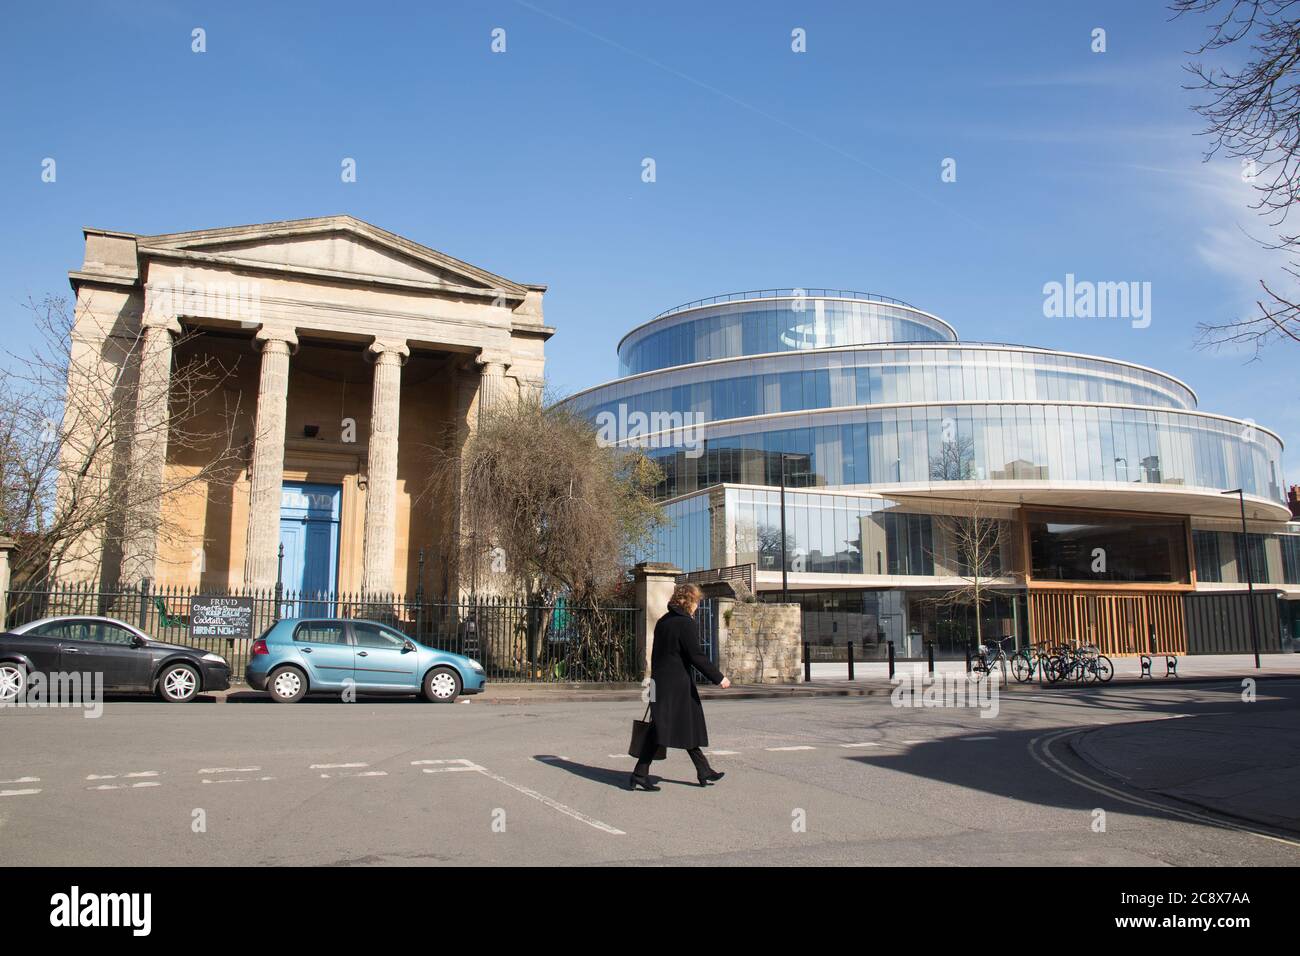 Three cyclistspassing the contrasting architecture of Freud's cafe and the Blavatnik school of government on Walton Street Oxford Stock Photo